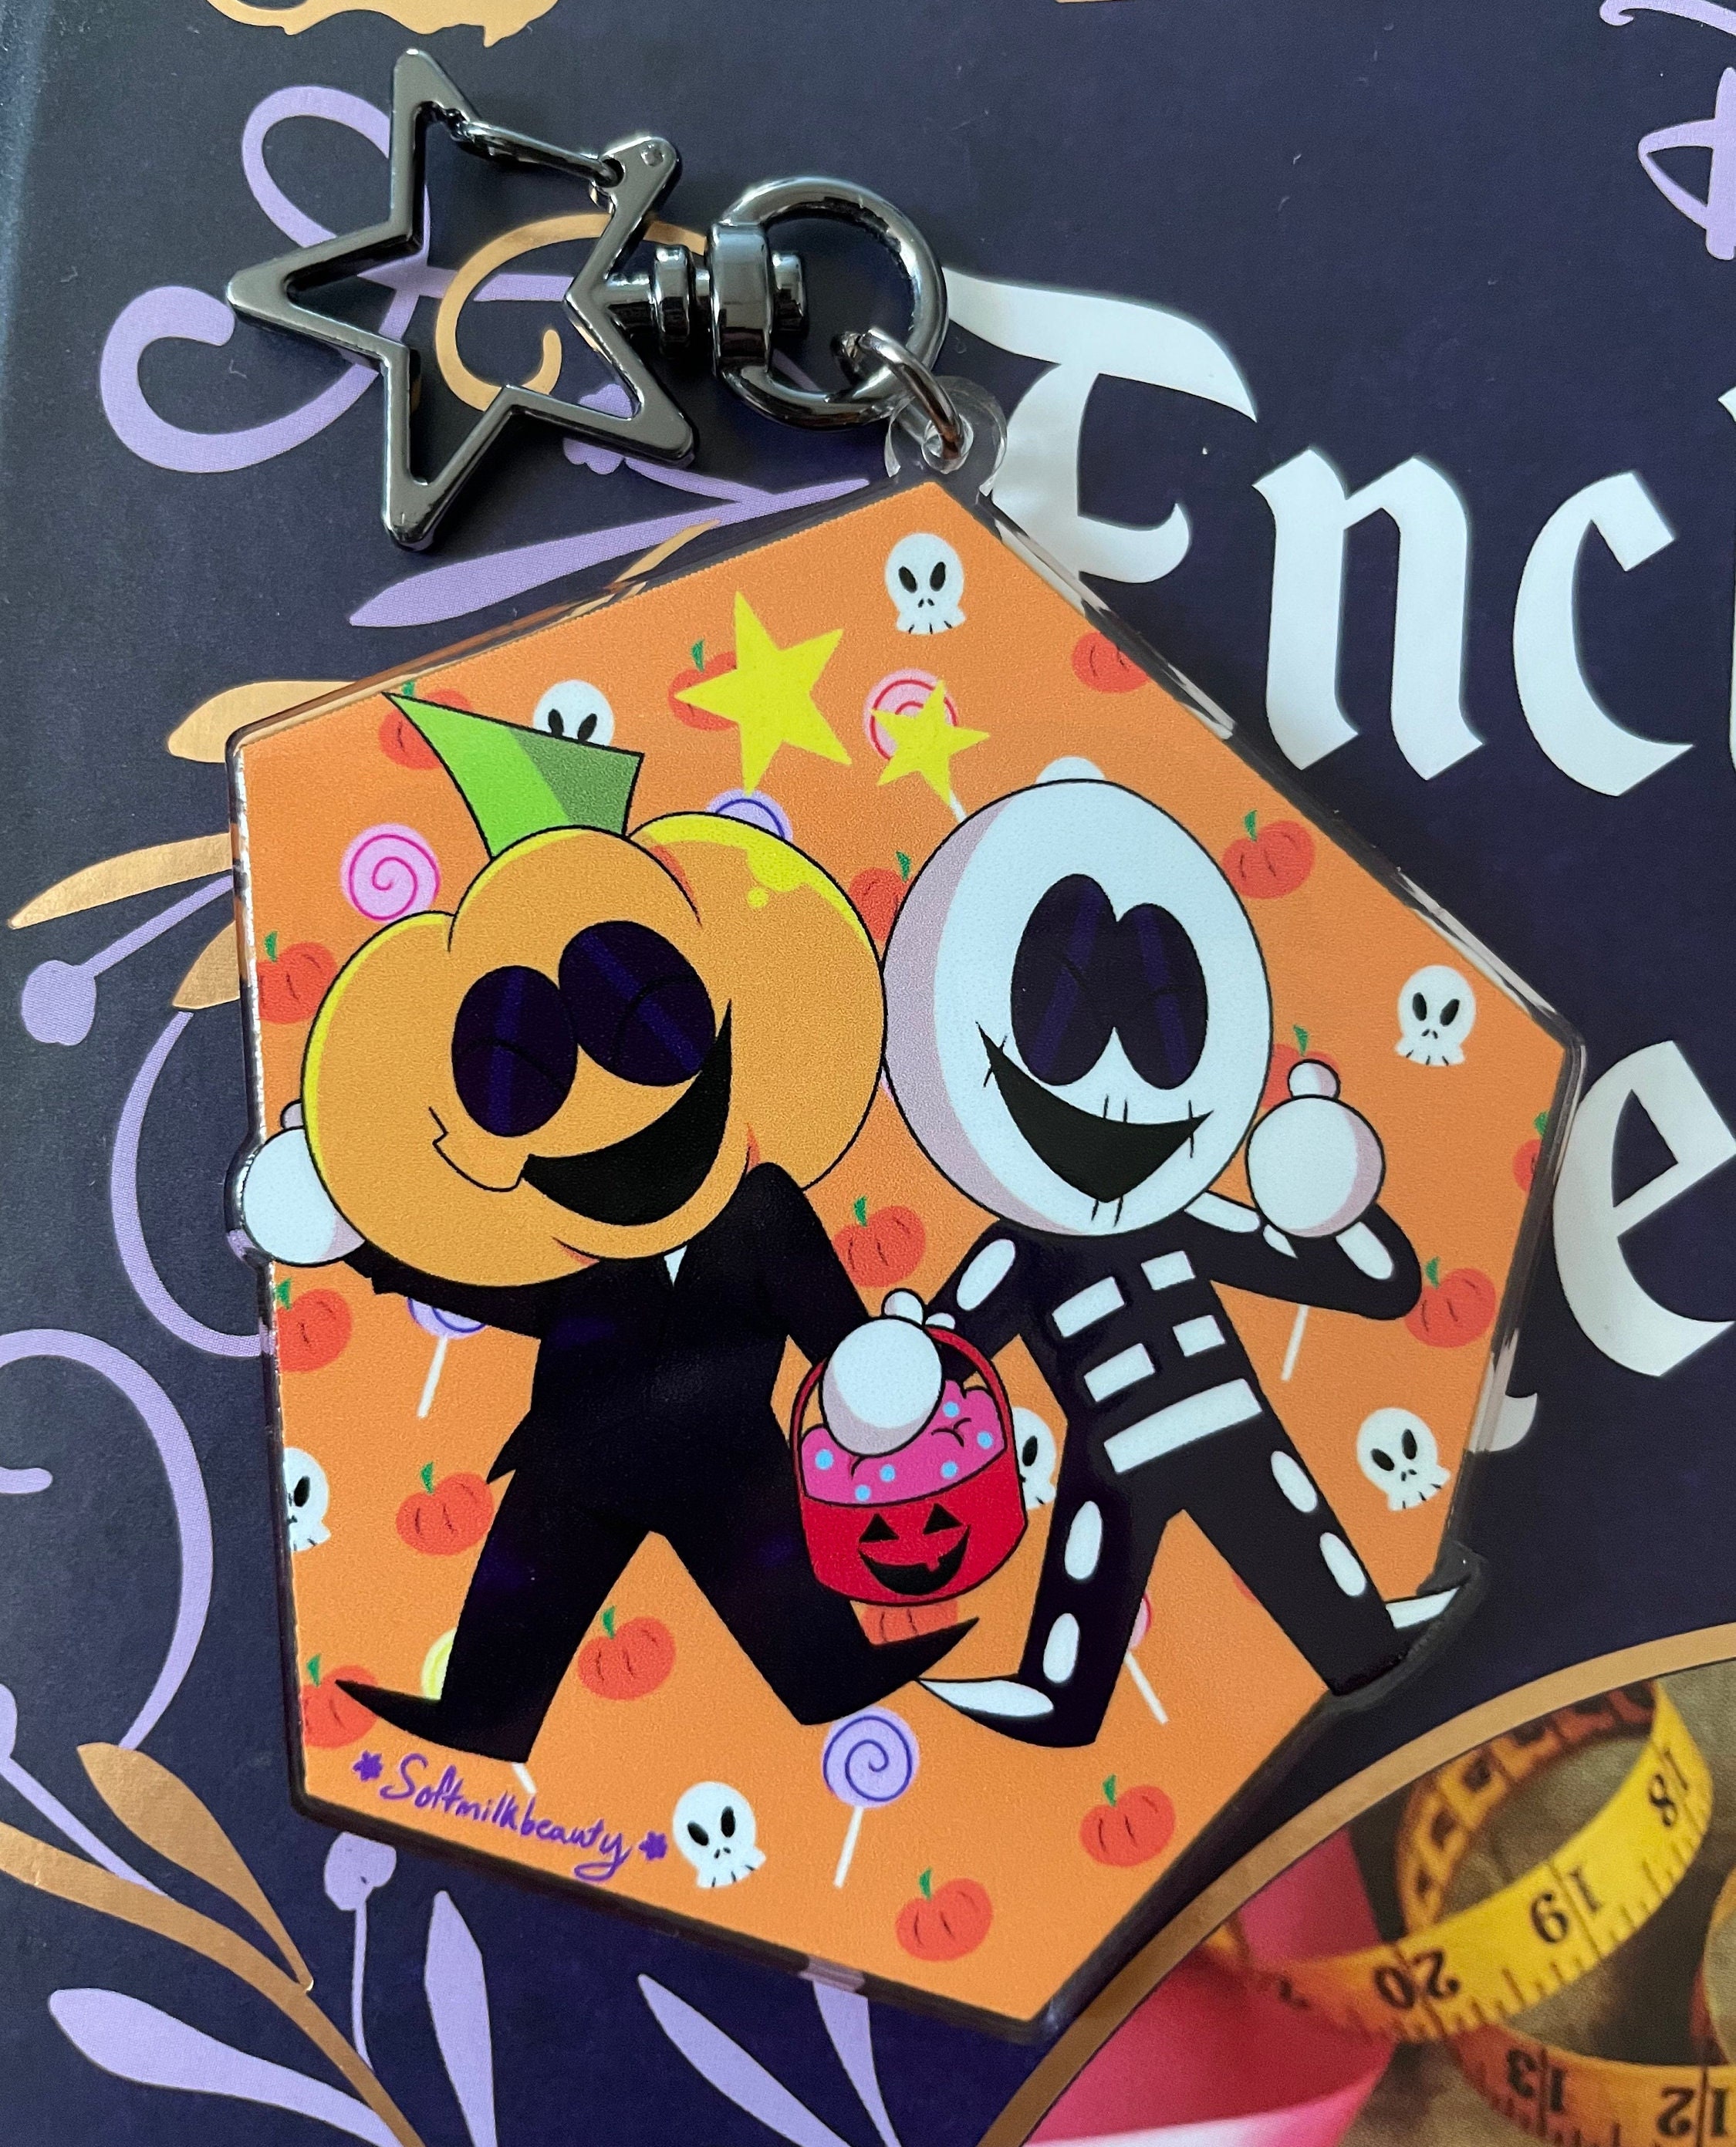 Spooky Month Keychains Acrylic Charms -  Sweden